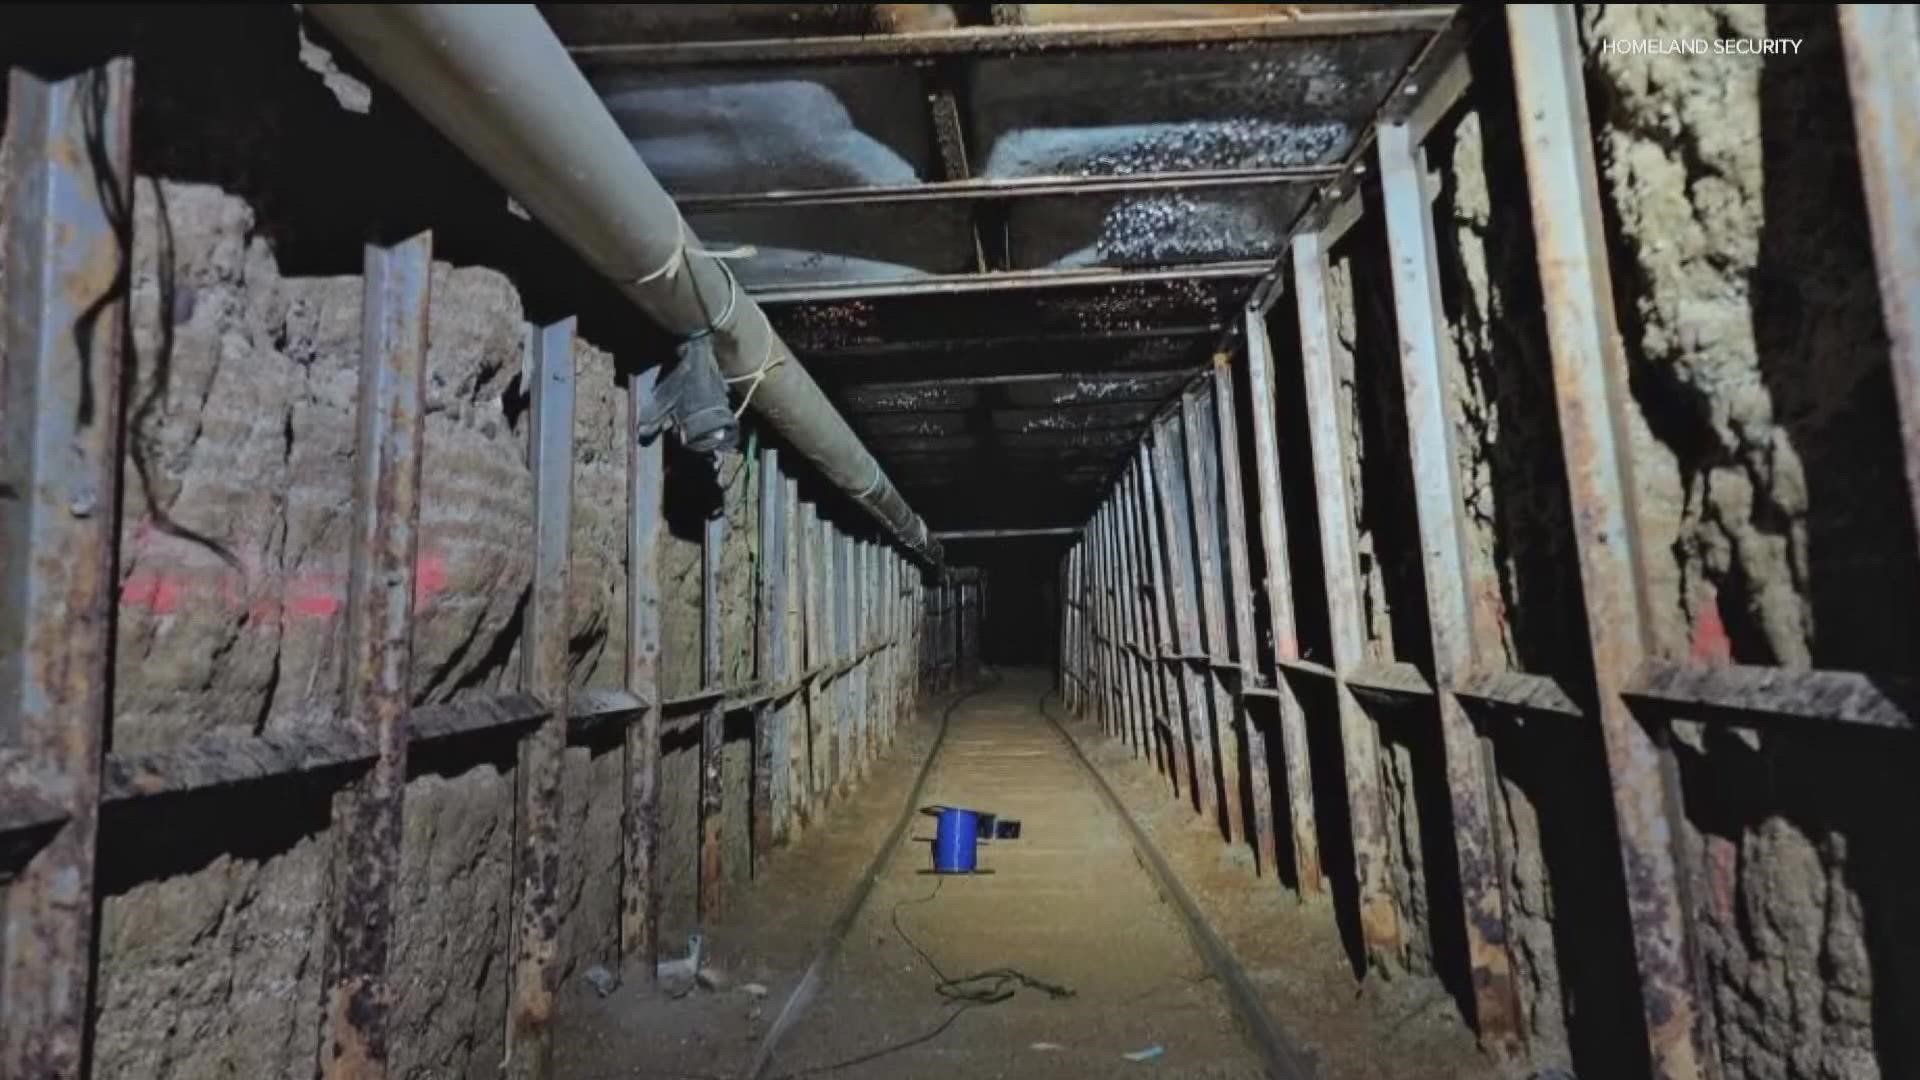 Mexican authorities discover a 793-foot tunnel equipped with rails, lighting, and a ventilation system.